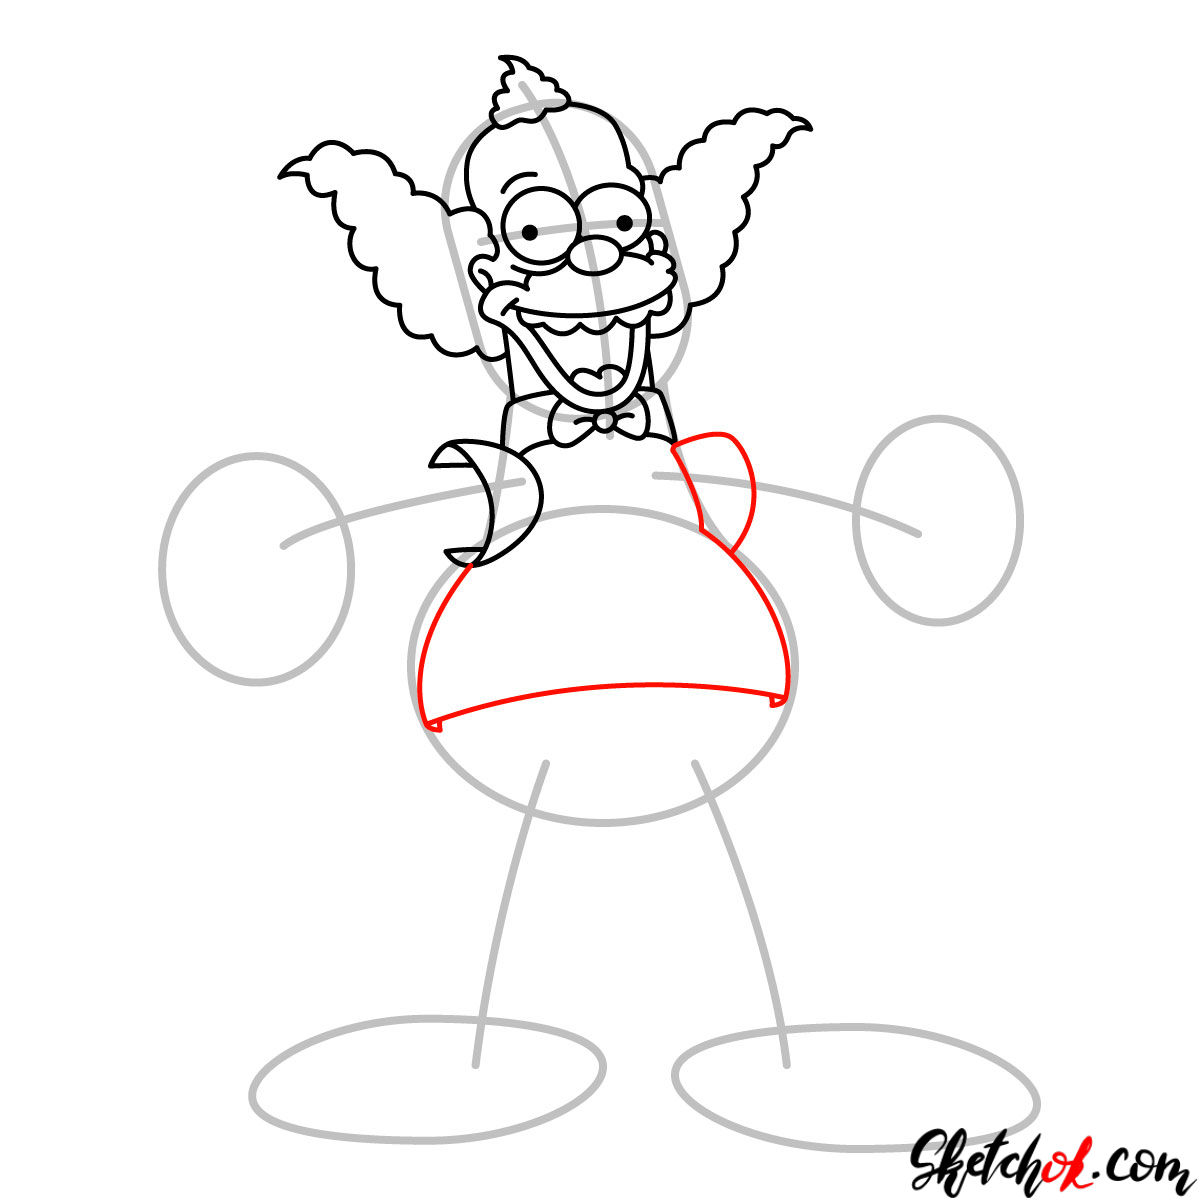 How to draw Krusty the Clown - step 07